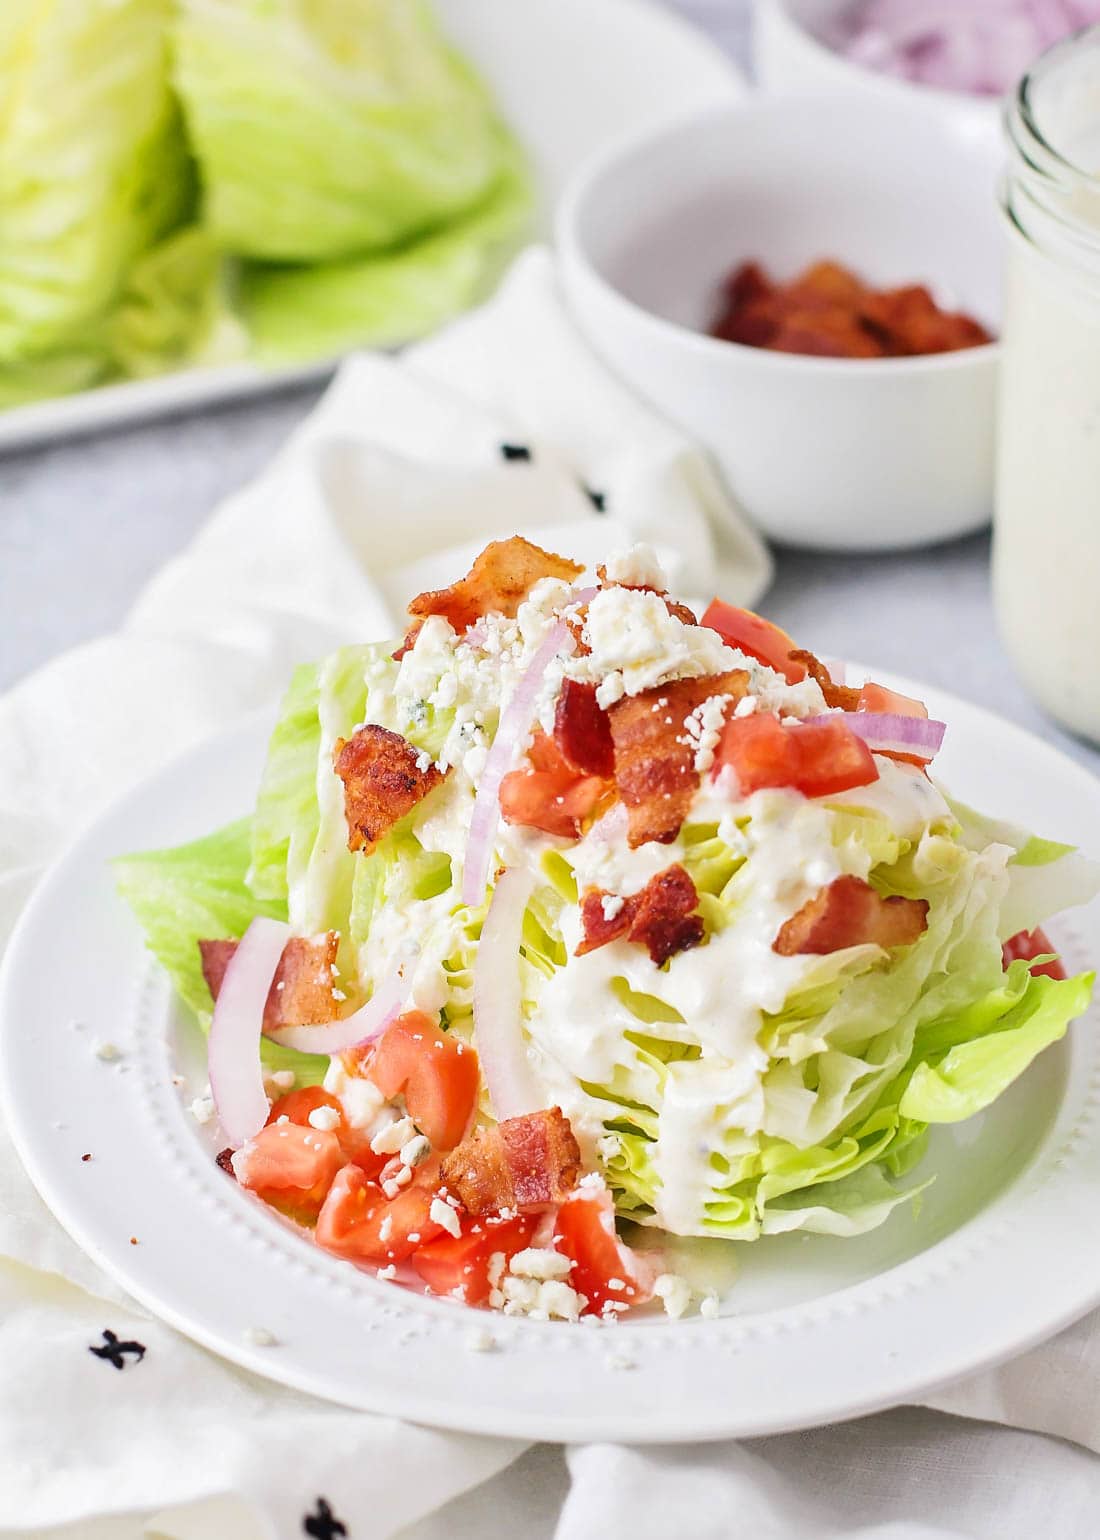 Serve country style ribs with wedge salad.